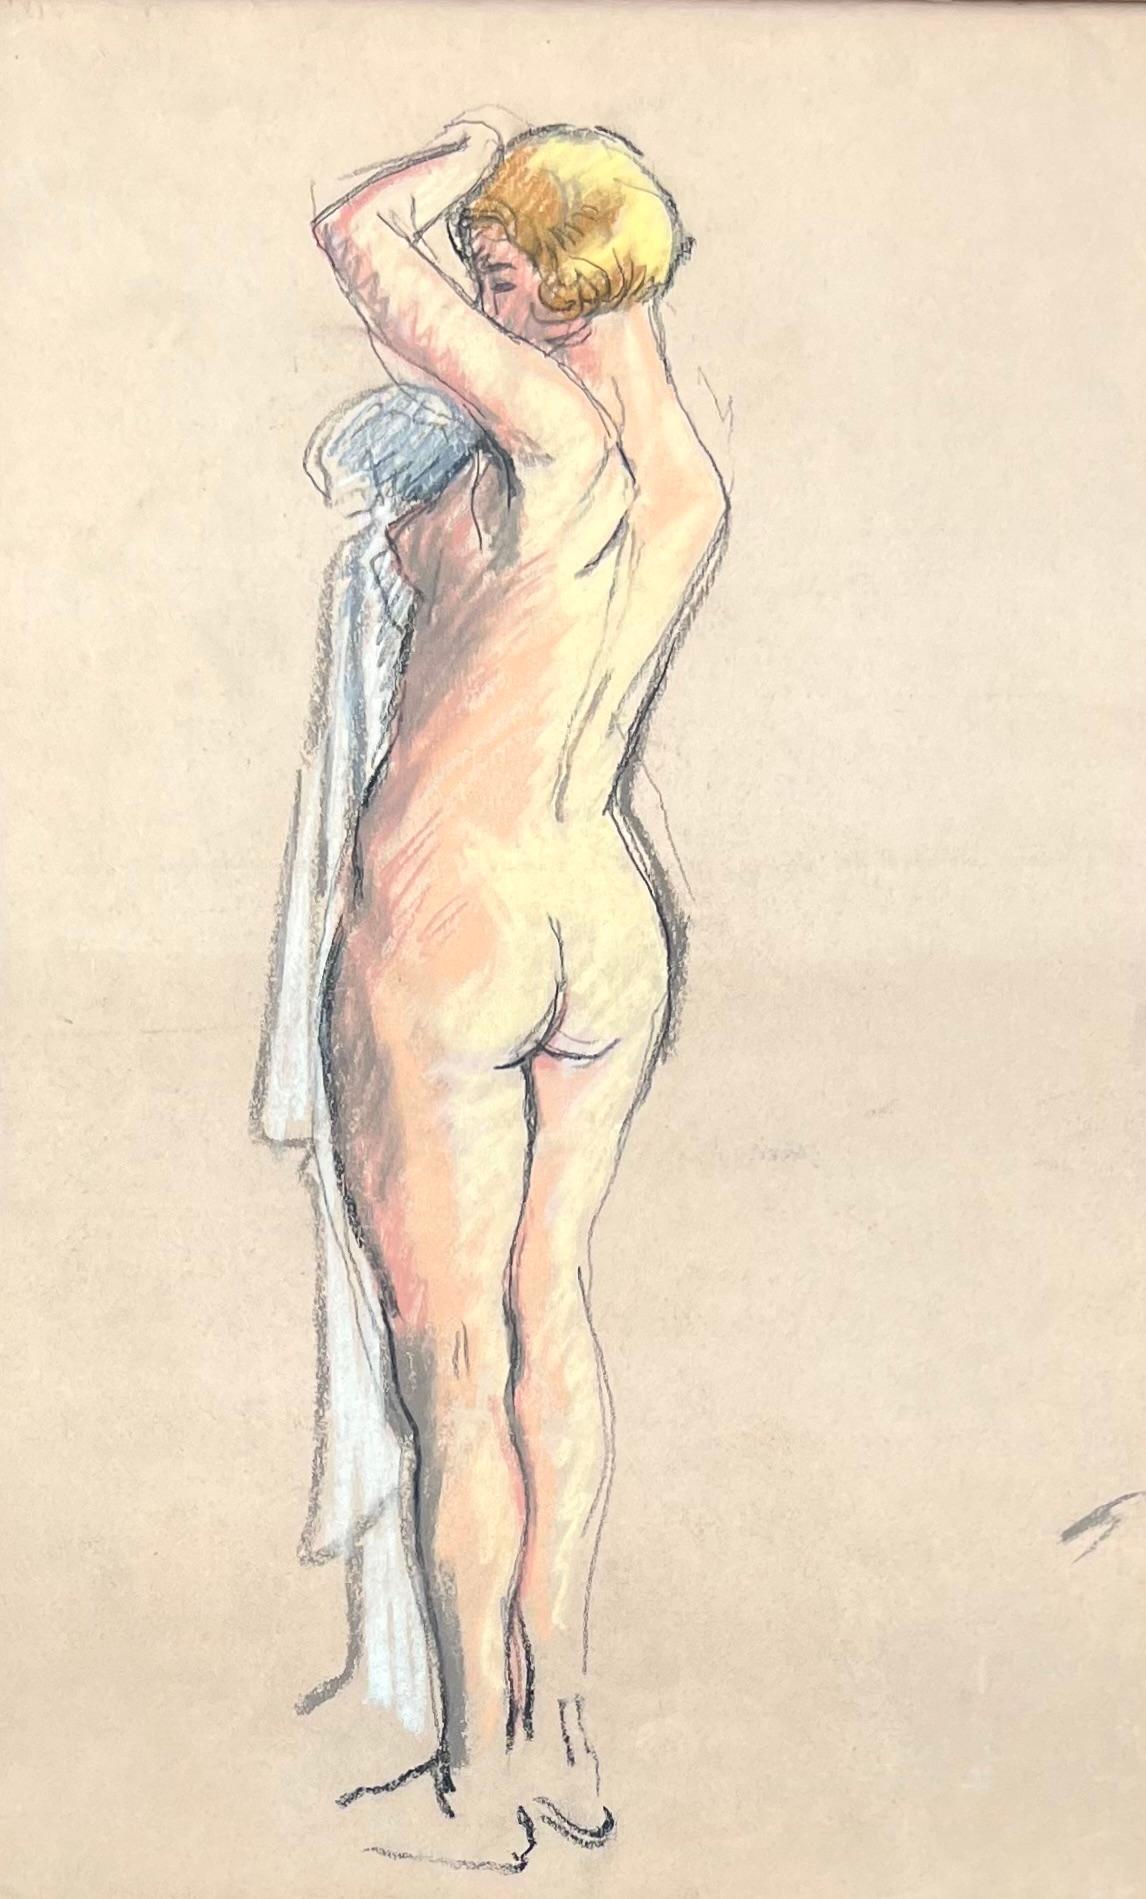 Pencil and gouache work on paper of a nude female by Ludovic-Rodo Pissarro. 
Provenance: Private collection The Netherlands, purchased from Stern Art-Dealers London, 1996.

Ludovic-Rodo Pissarro (1878-1952) was Camille Pissarro's fourth son.